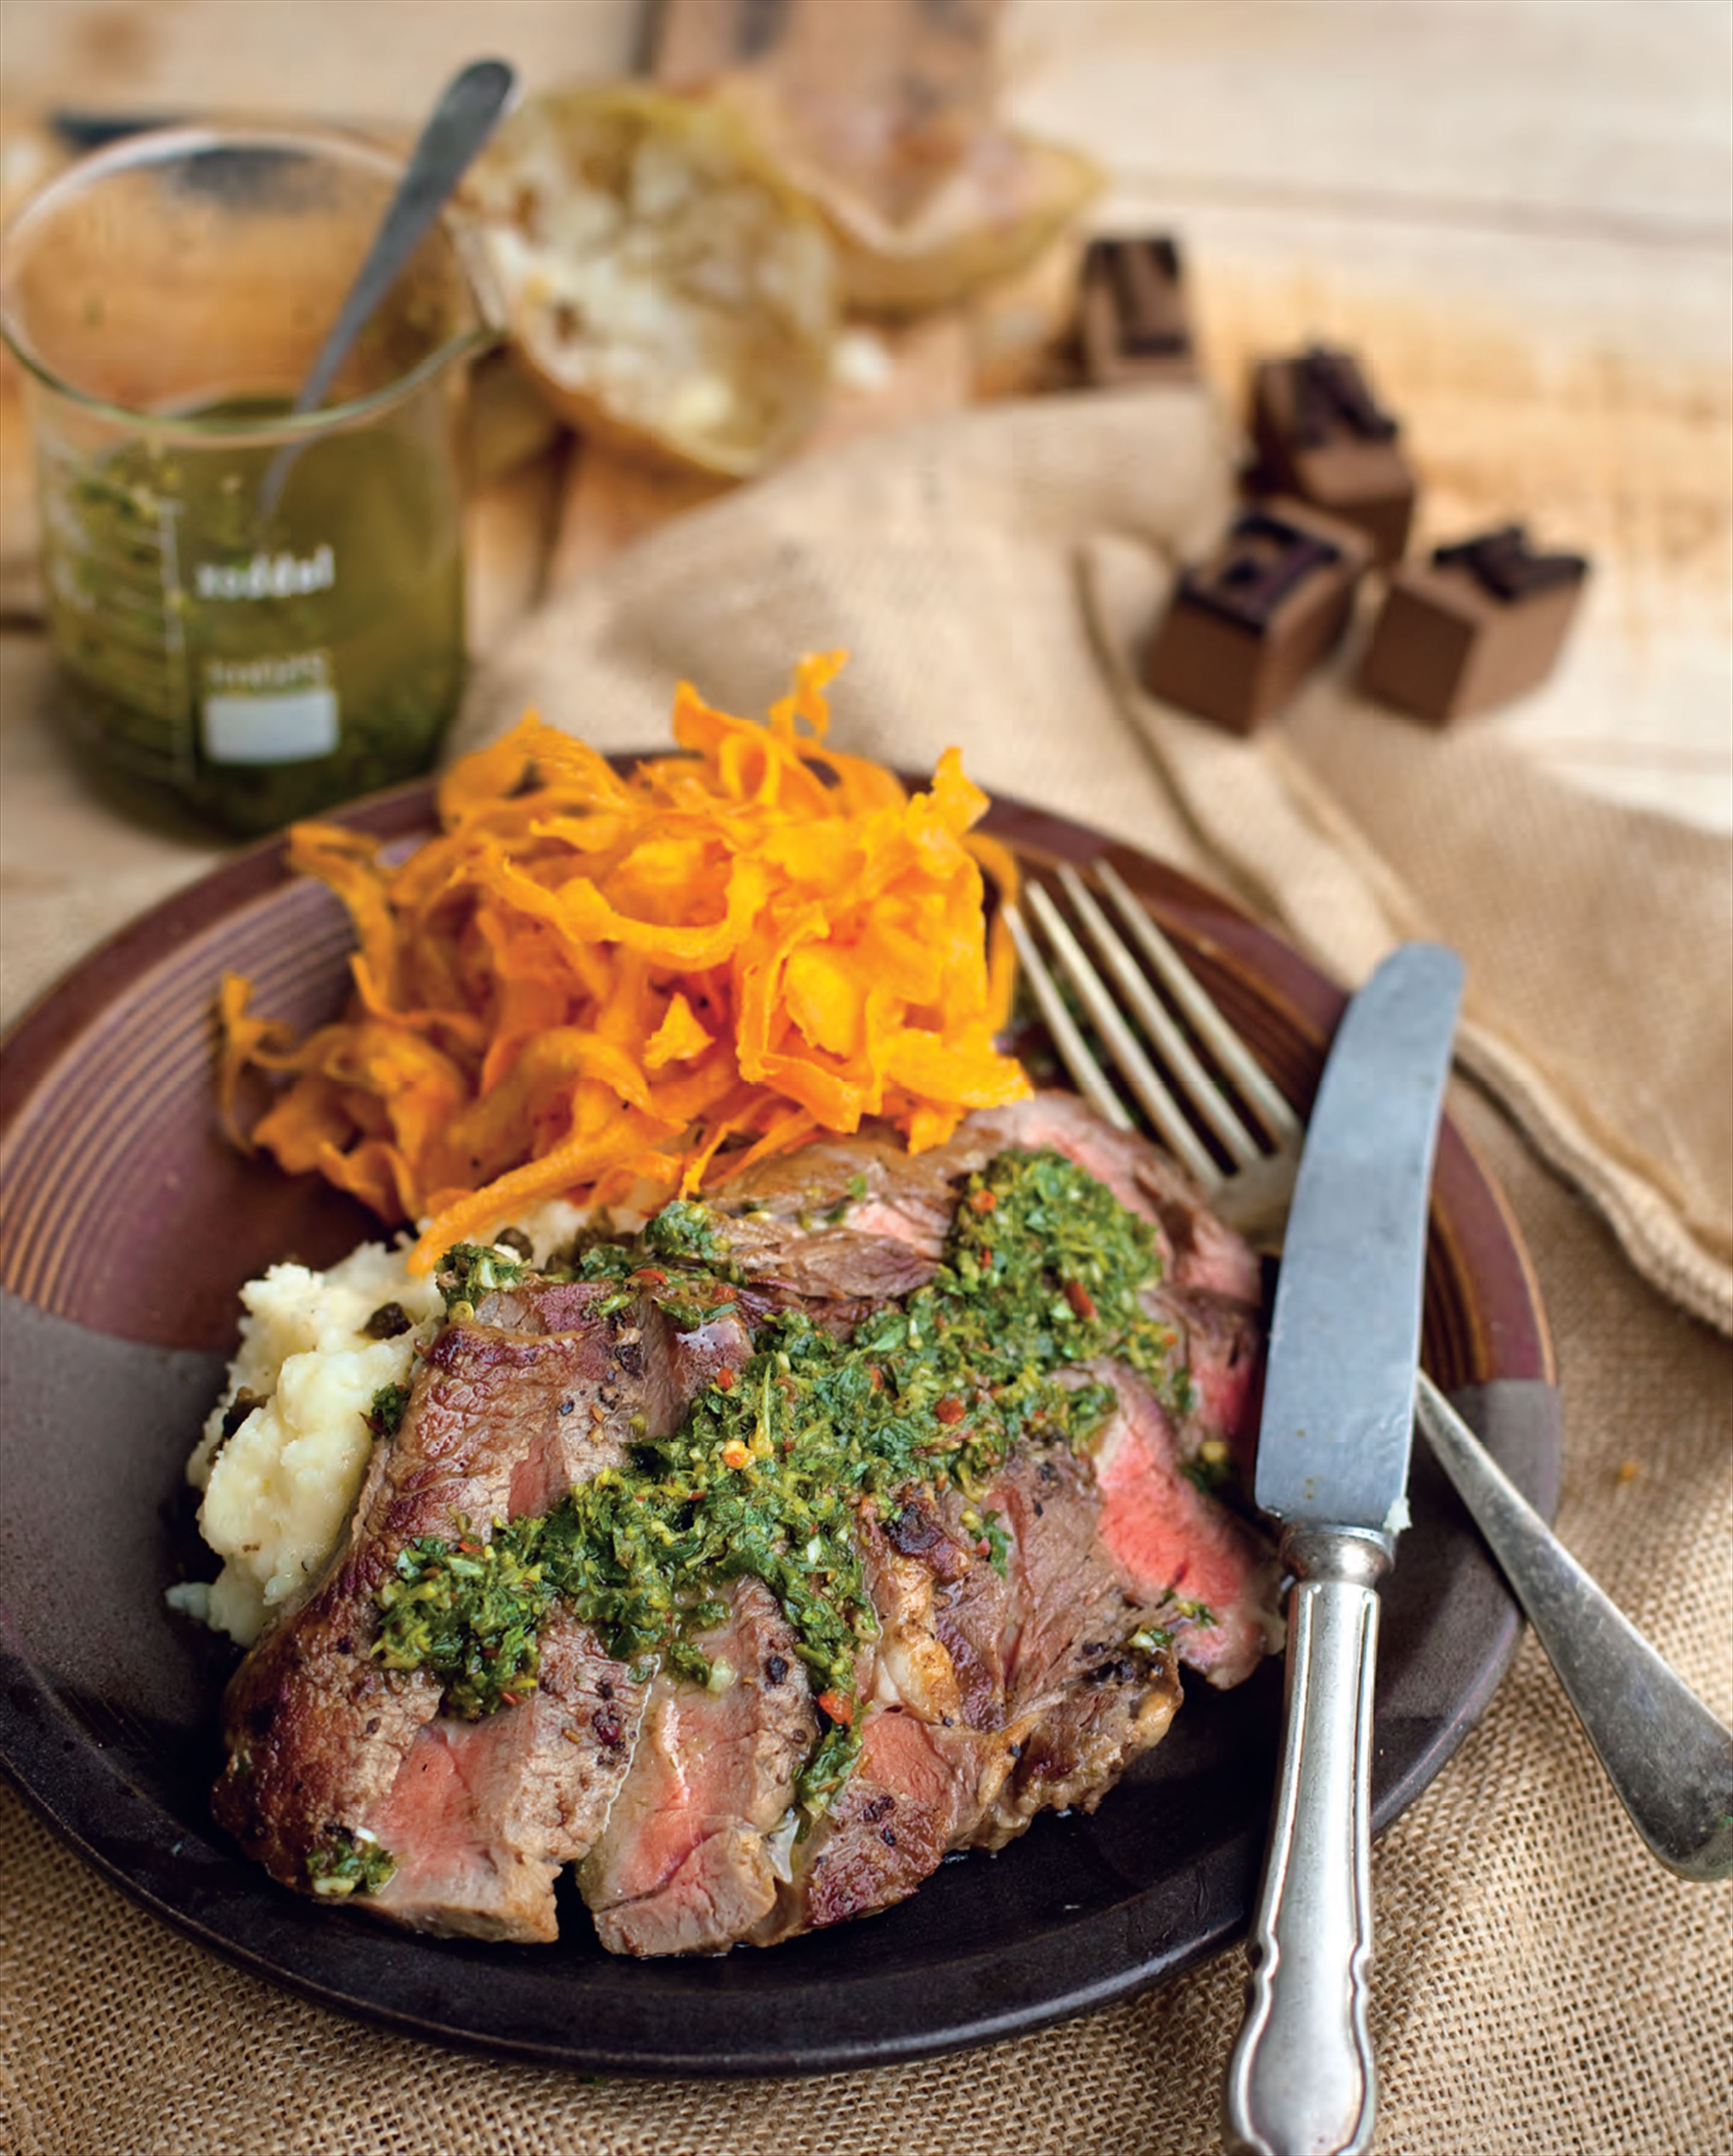 Seared Scotch fillets with chimichurri sauce & sweet potato chips